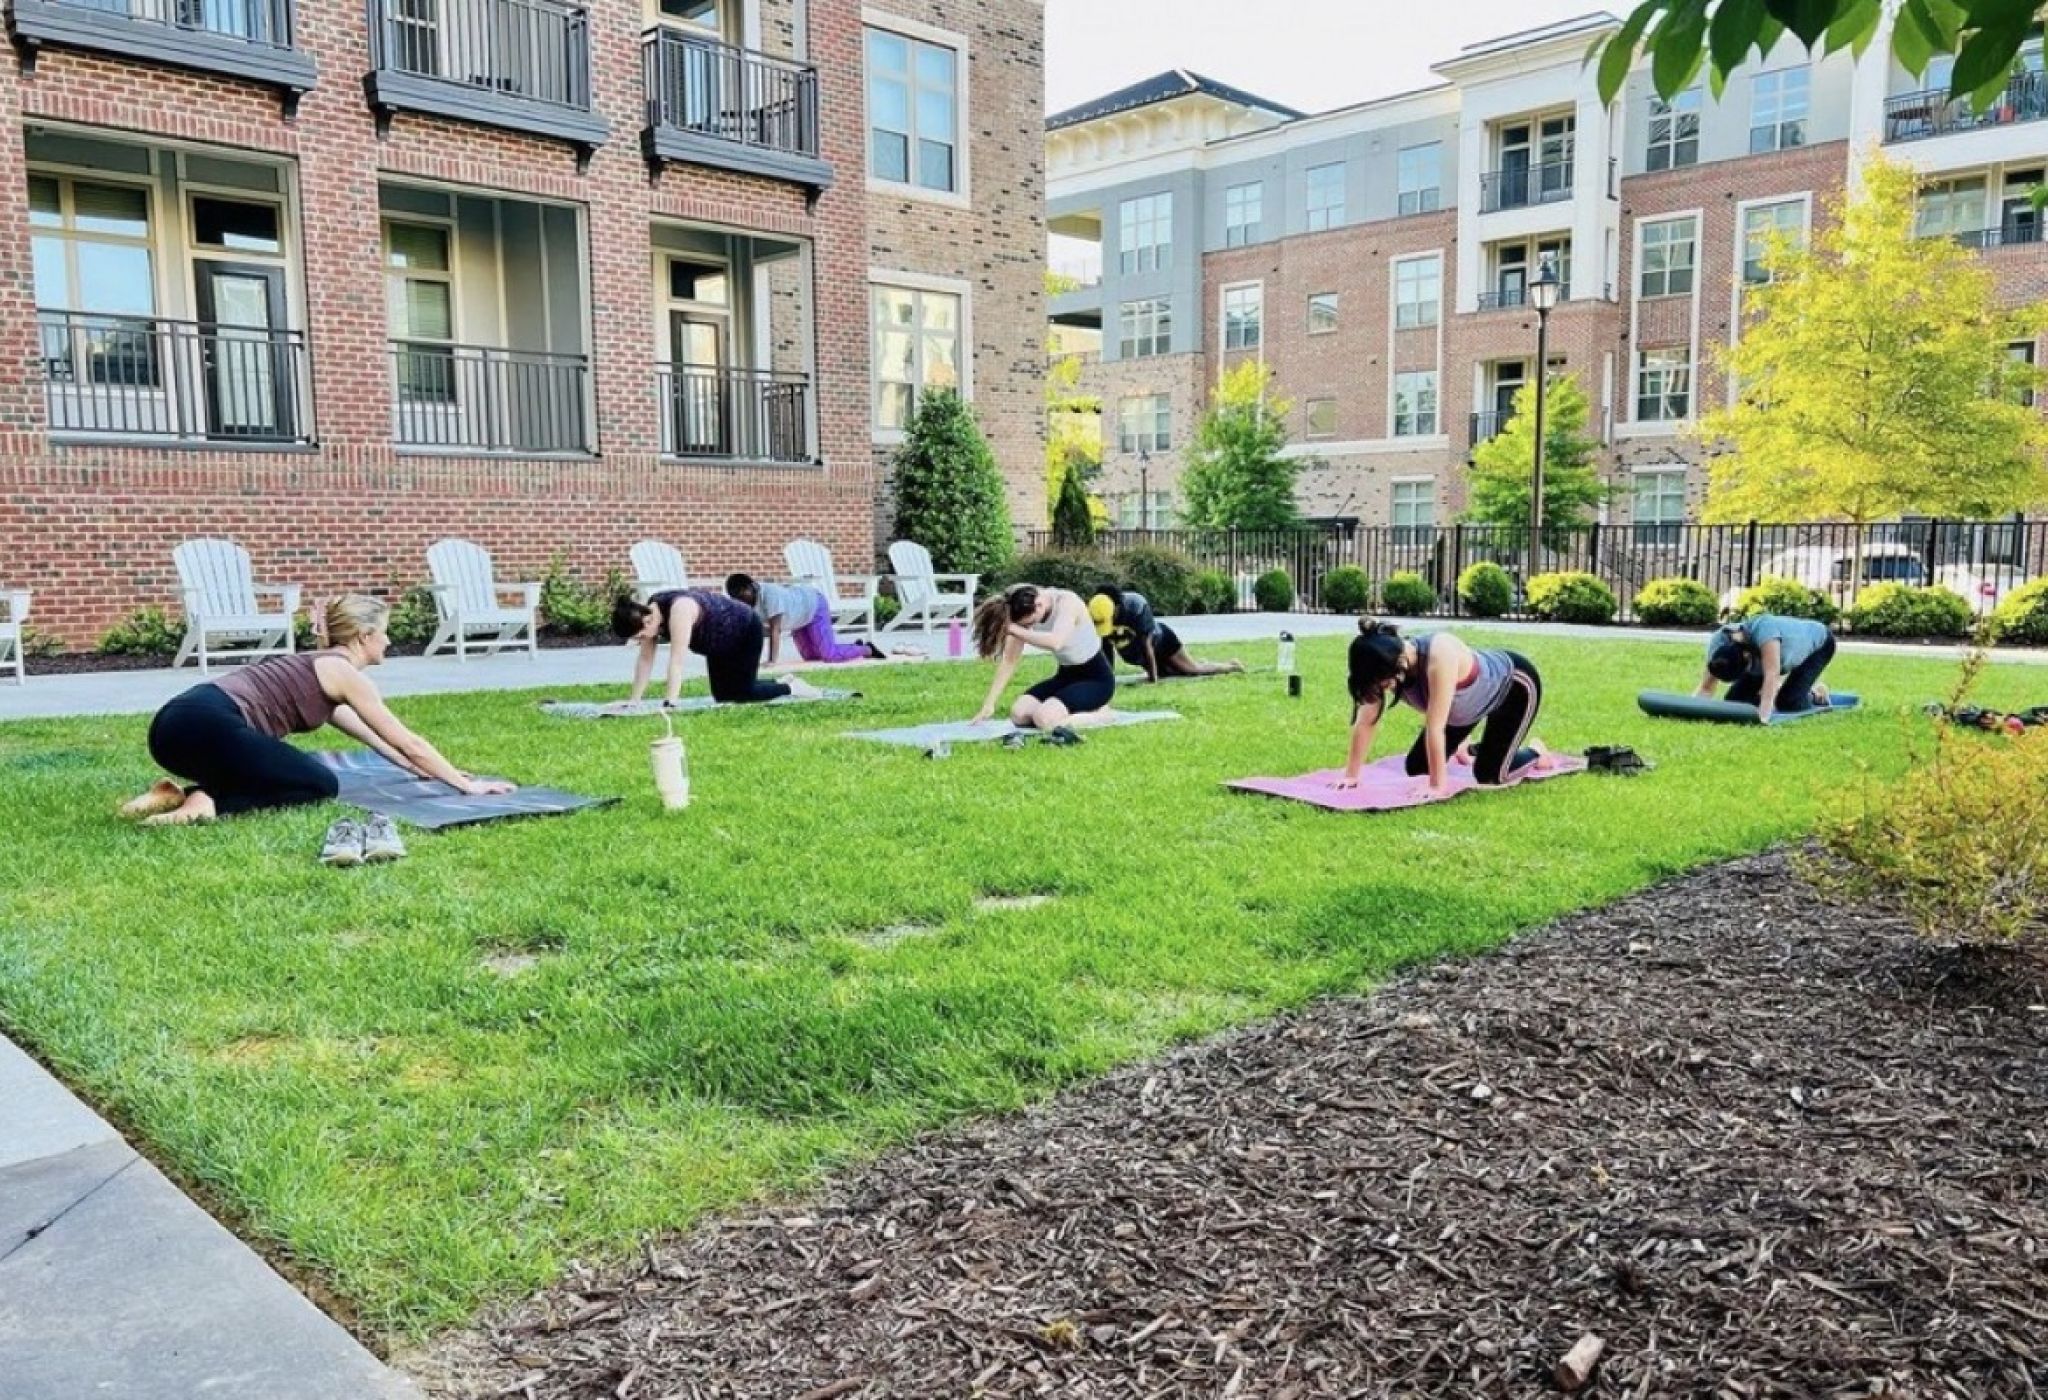 Outdoor lawn with a yoga class occurring